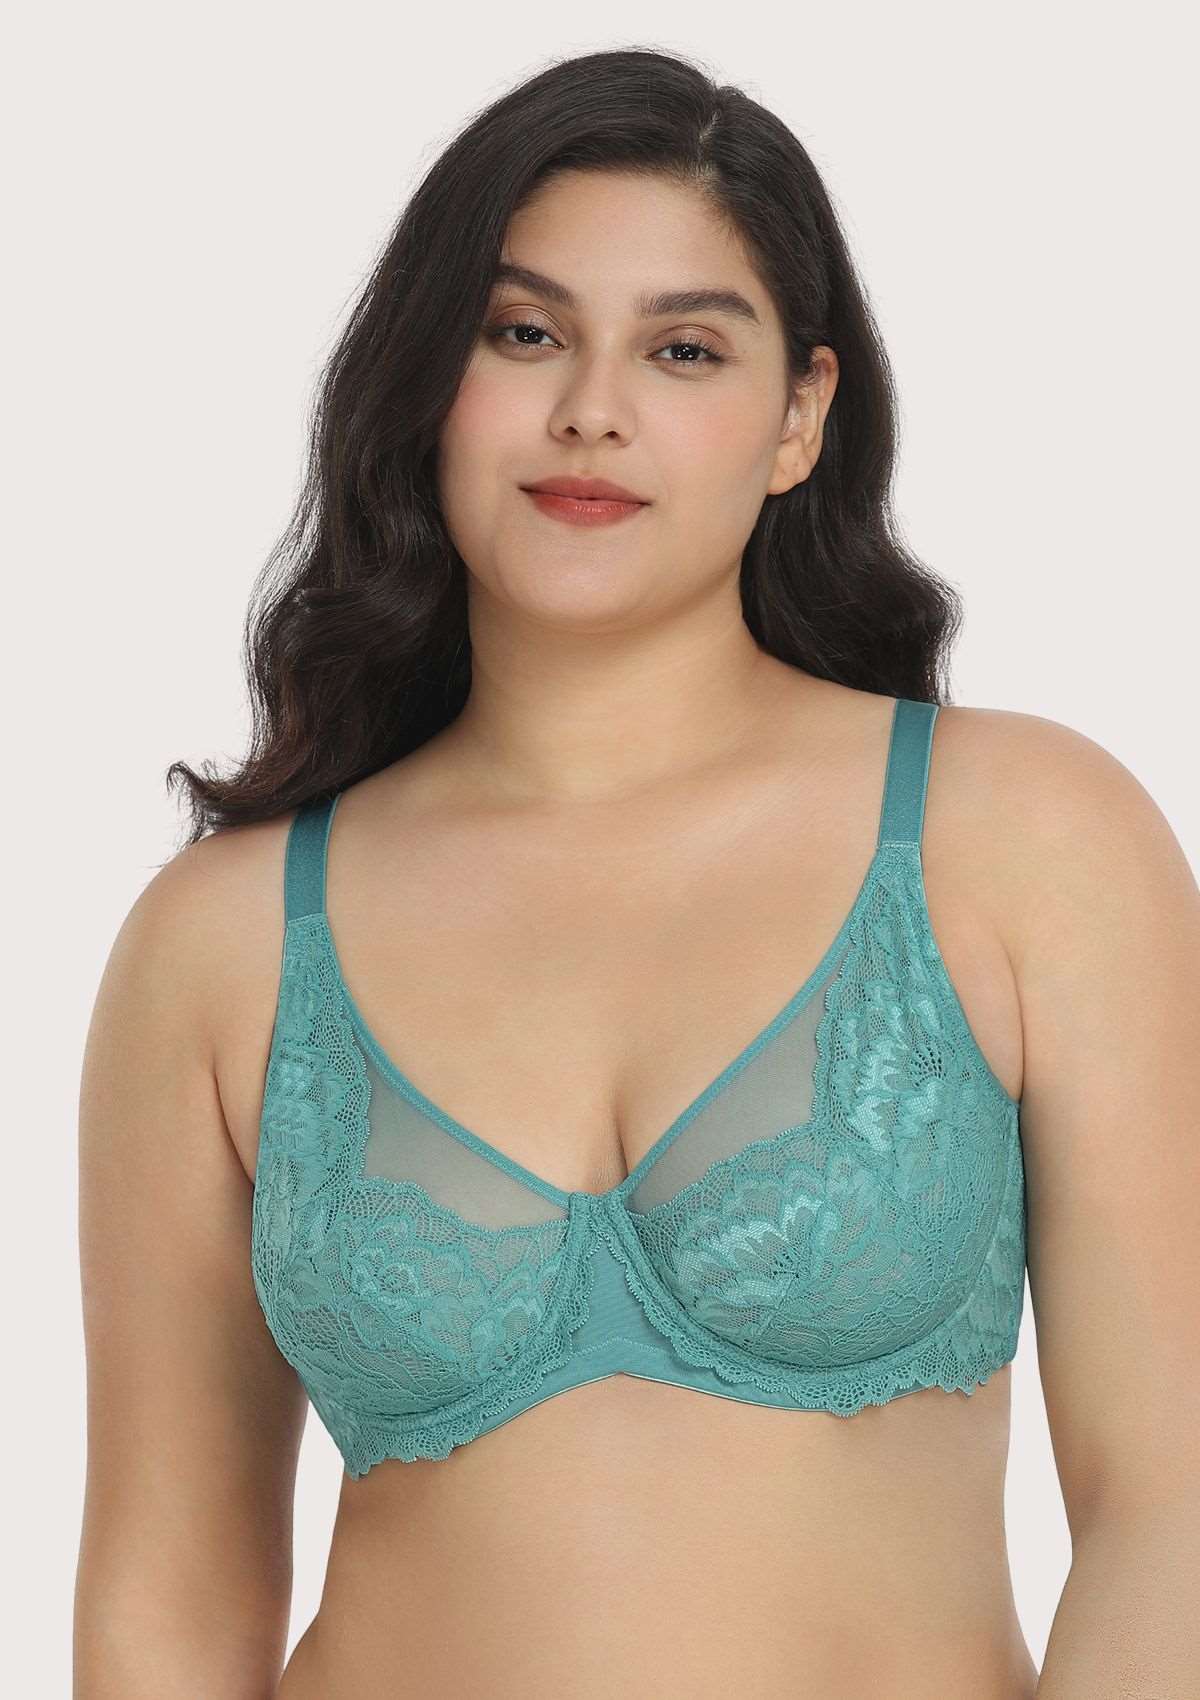 HSIA Paeonia Lace Full Coverage Underwire Non-Padded Uplifting Bra - Purple / 38 / C